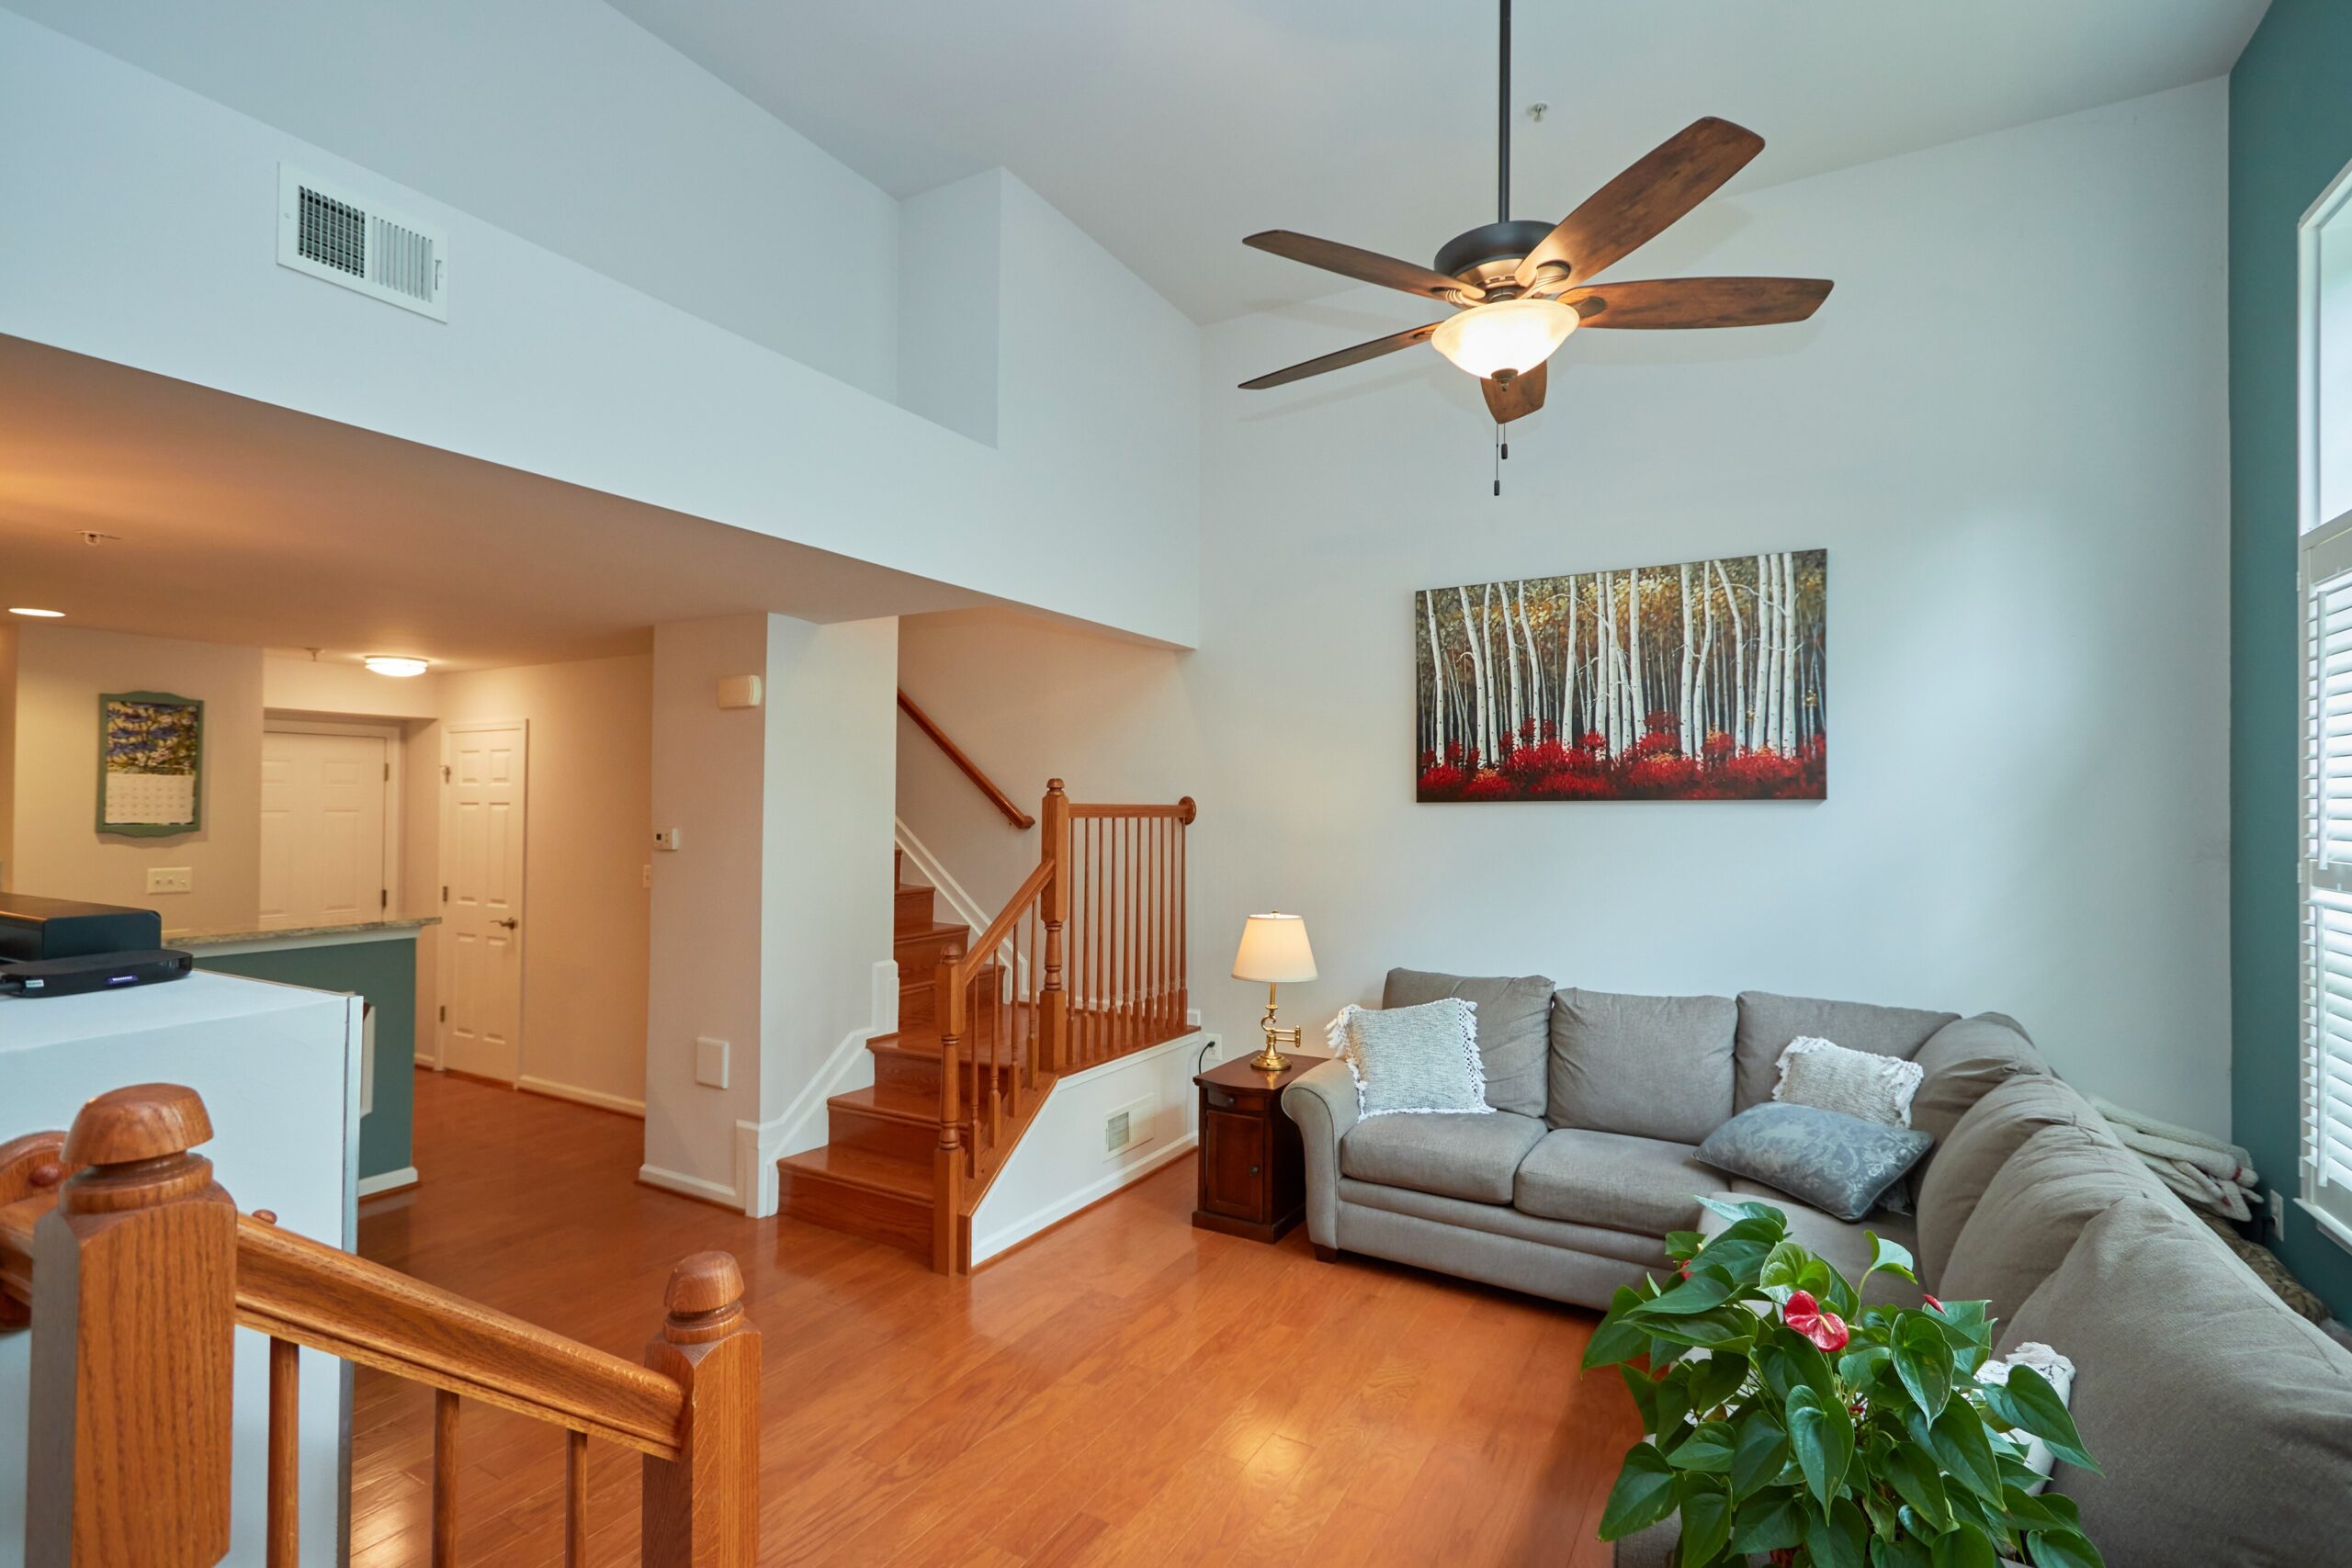 Professional interior photo of 6058 Aster Haven Circle - showing the living room from the front entrance with high ceiling, hardwood floors, staircase to second floor